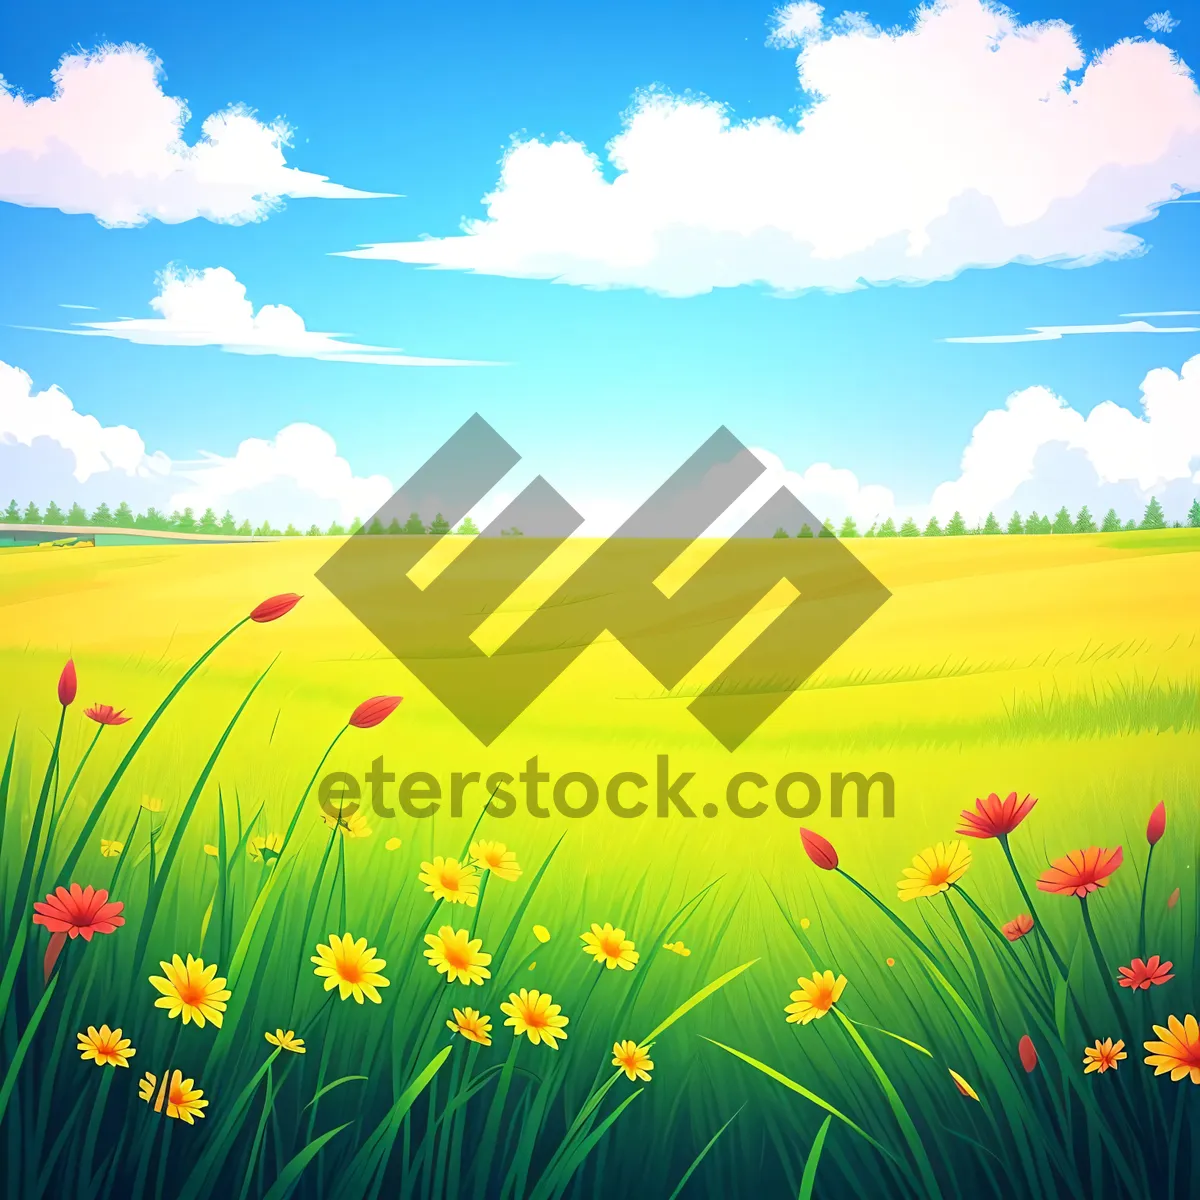 Picture of Vibrant Summer Meadow in Rural Landscape